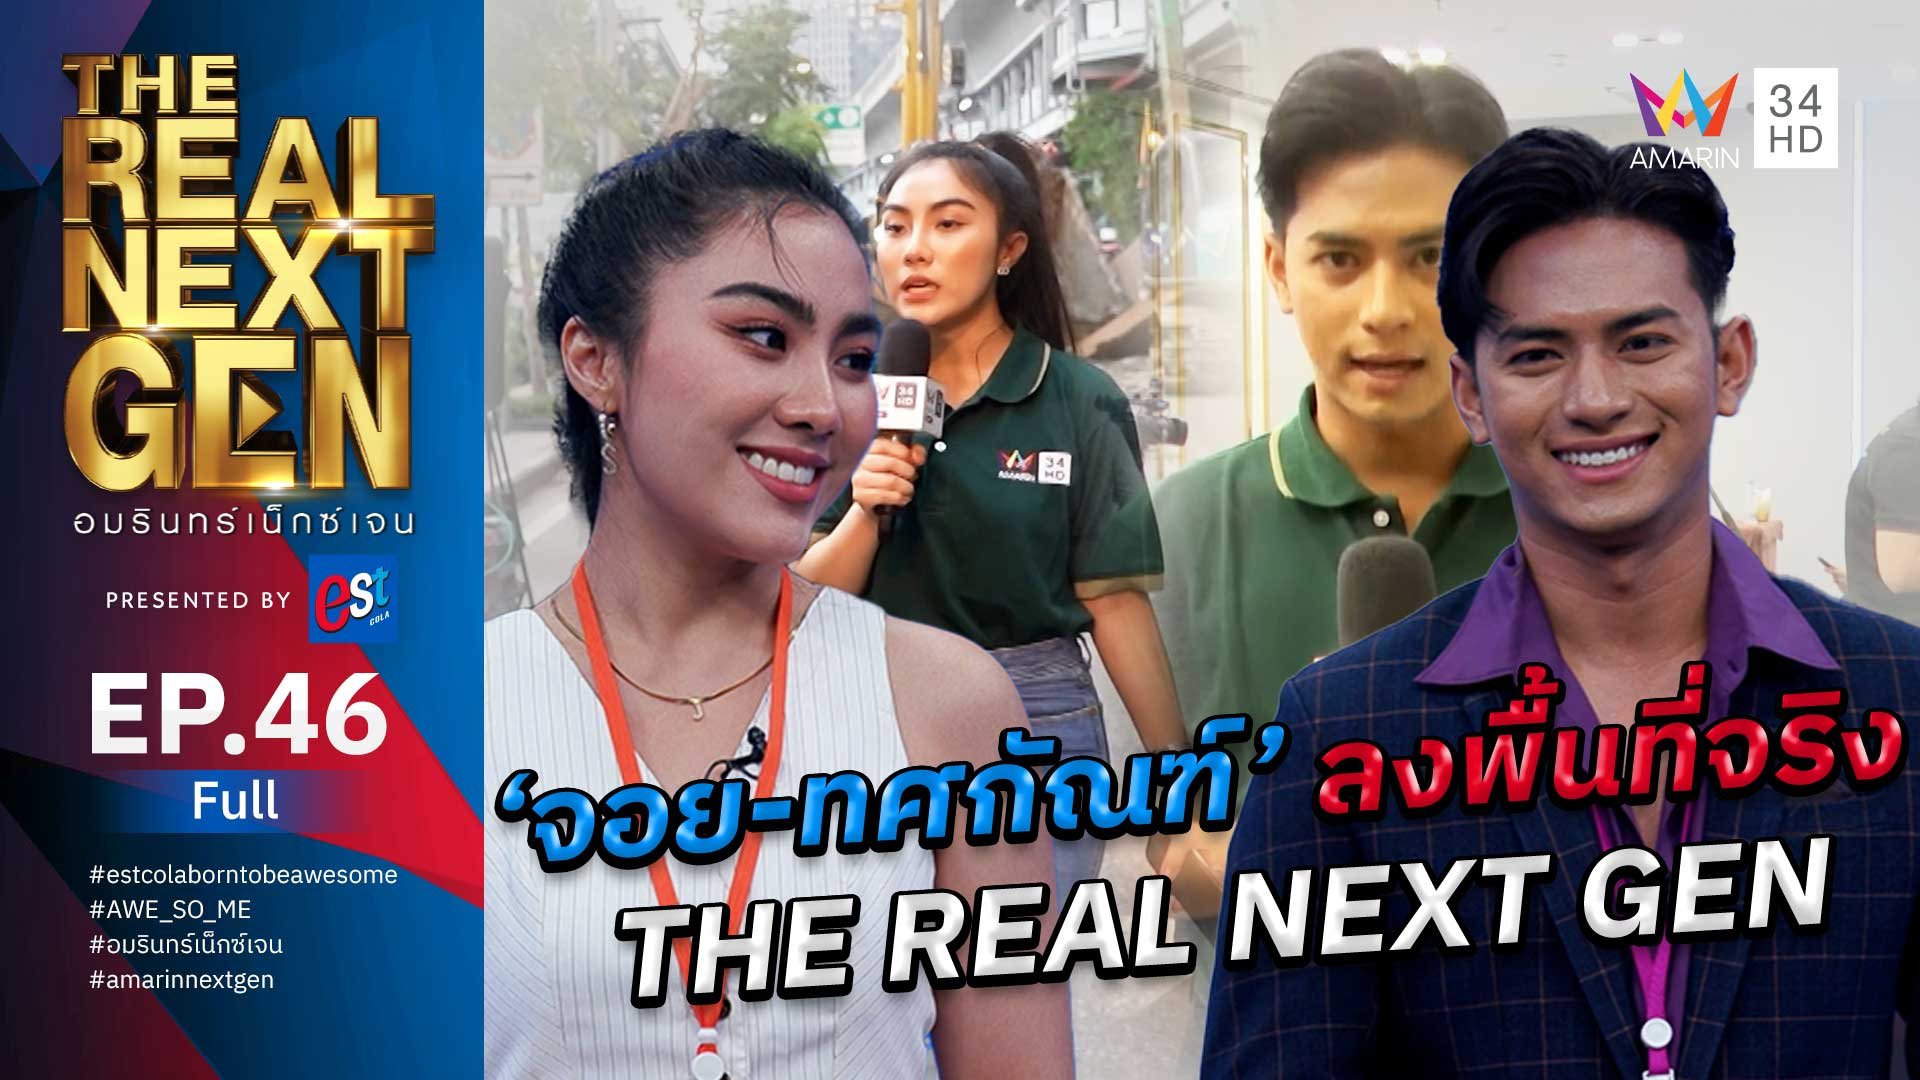 The Real Next Gen อมรินทร์เน็กซ์เจน | EP.46 THE REAL NEXT GEN อมรินทร์เน็กซ์เจน Presented By est cola  | 20 พ.ย. 66 | AMARIN TVHD34